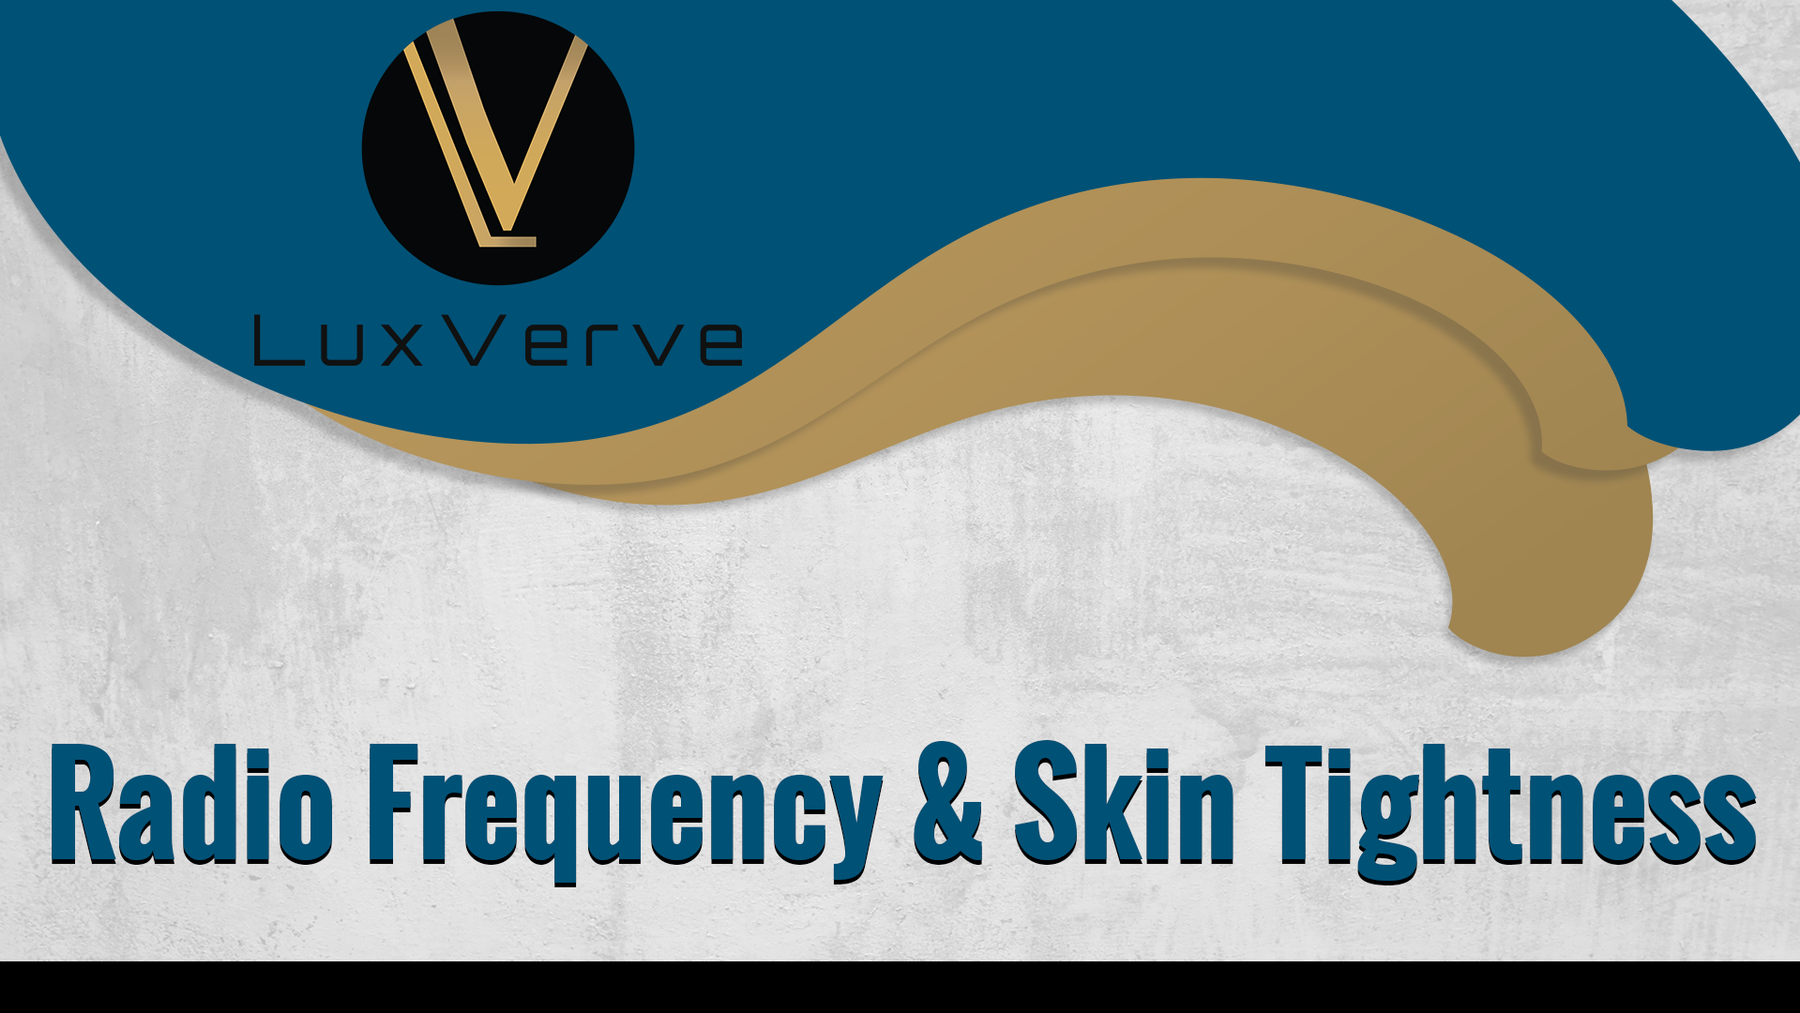 Radio-Frequency Skin Tightening: Is it worth it? - LuxVerve